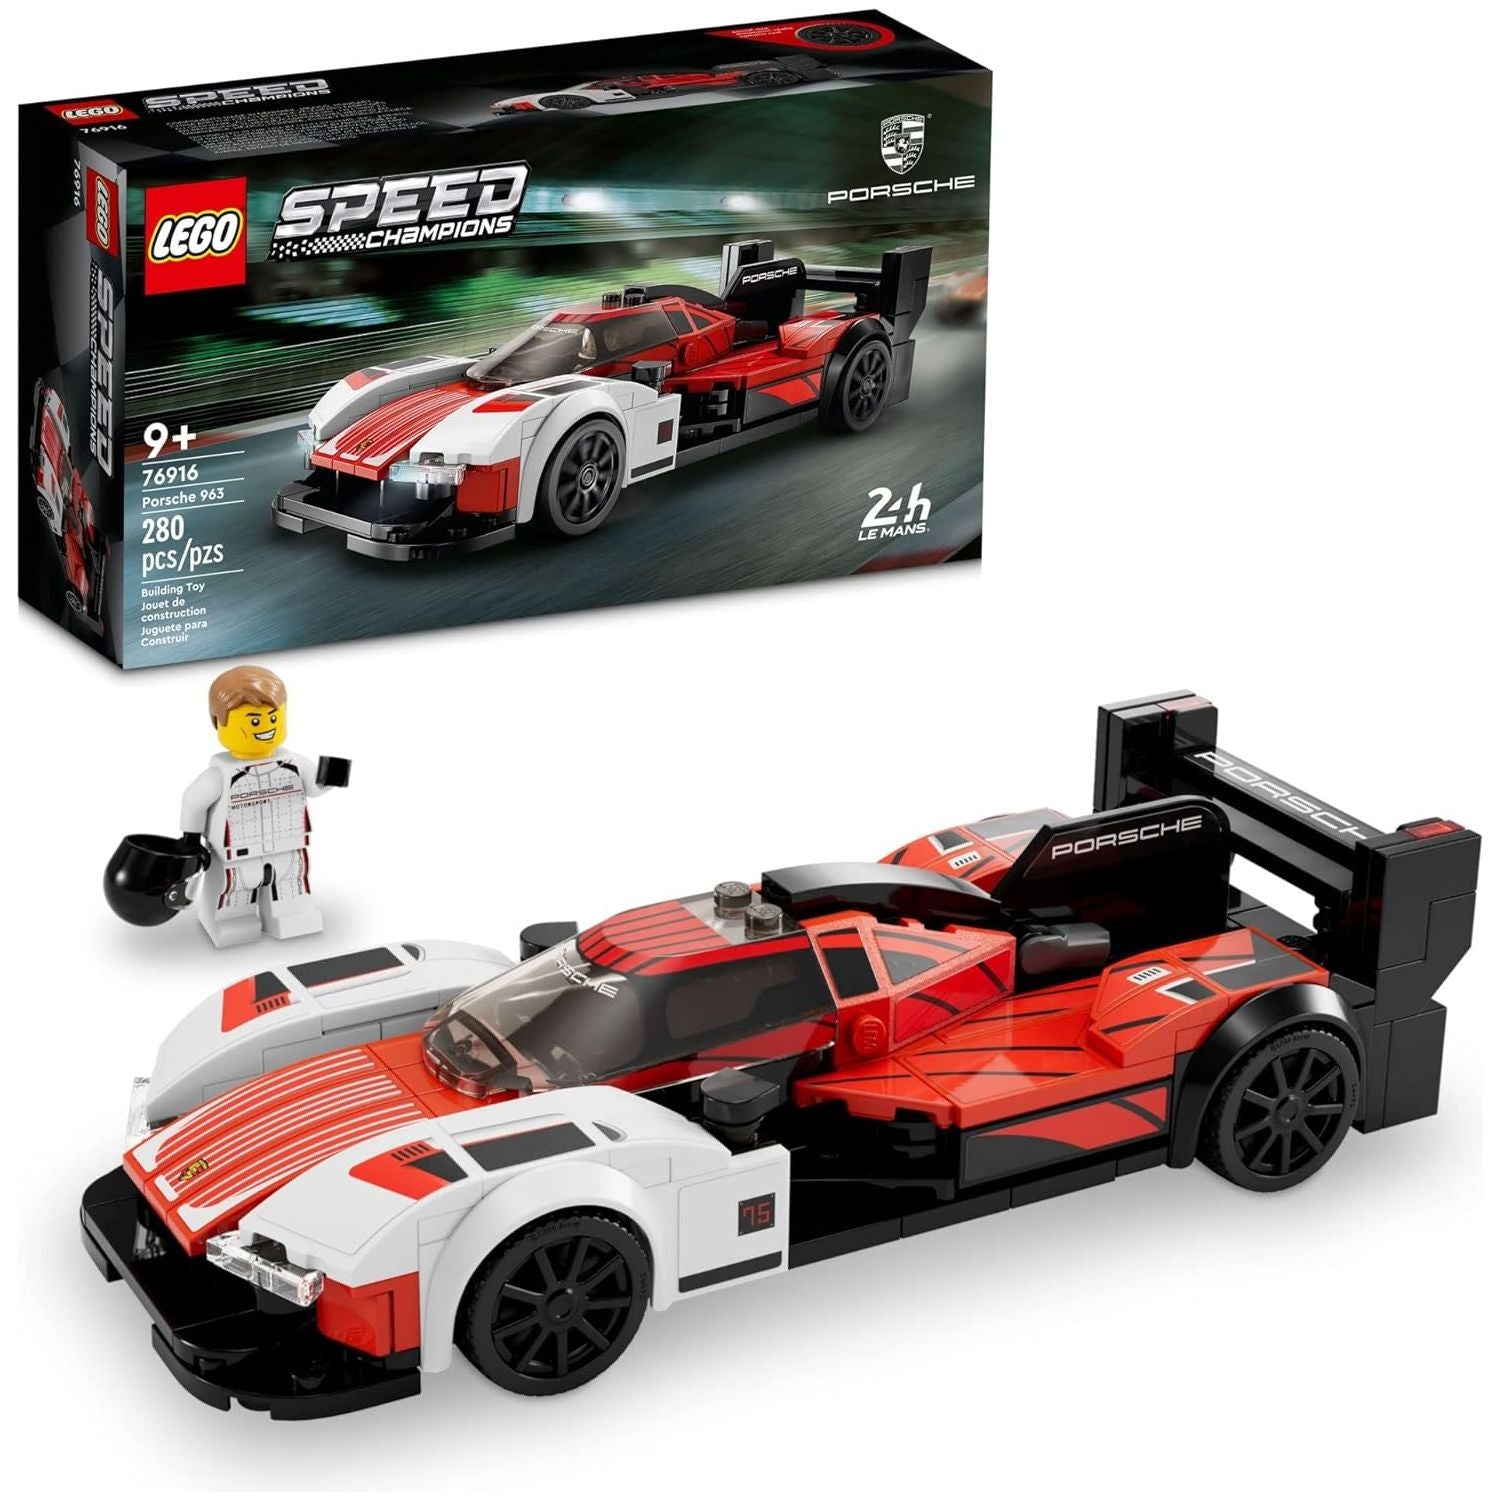 LEGO Speed Champions Porsche 963 76916, Model Car Building Kit, Racing Vehicle Toy for Kids, 2023 Collectible Set with Driver Minifigure